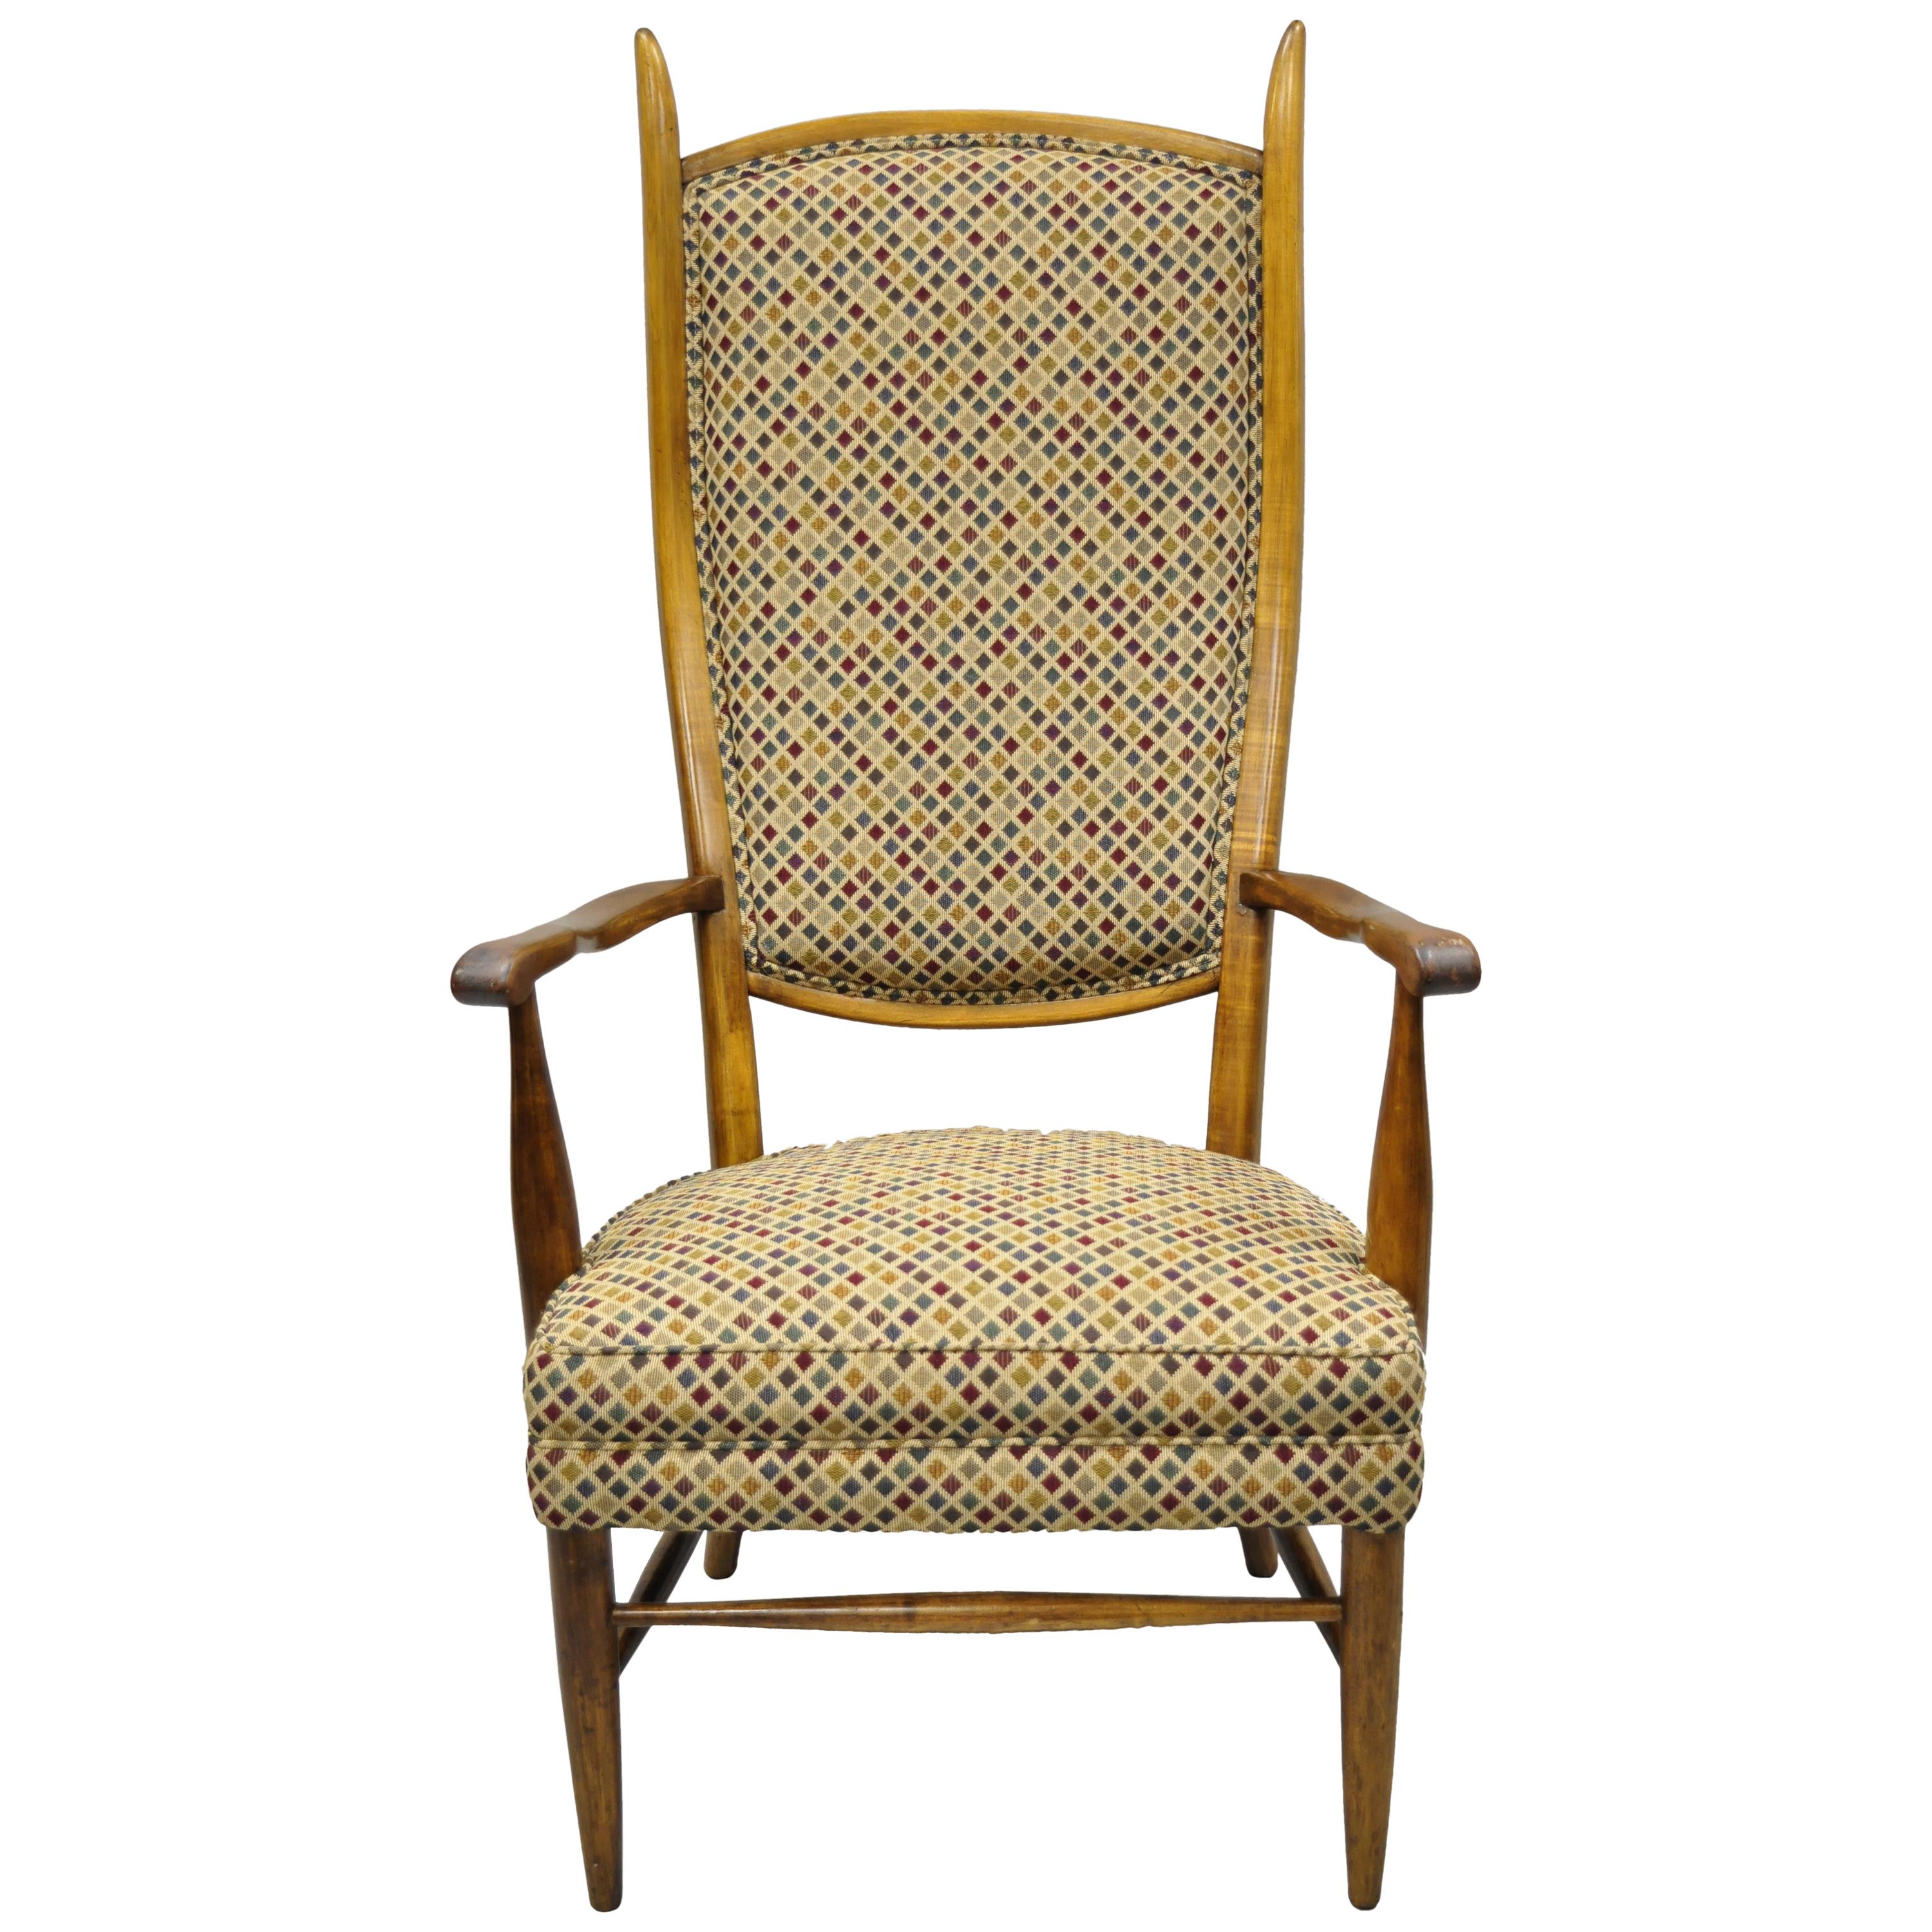 Vintage Mid-Century Modern High Back Maple Armchair Attribute to Edward Wormley For Sale